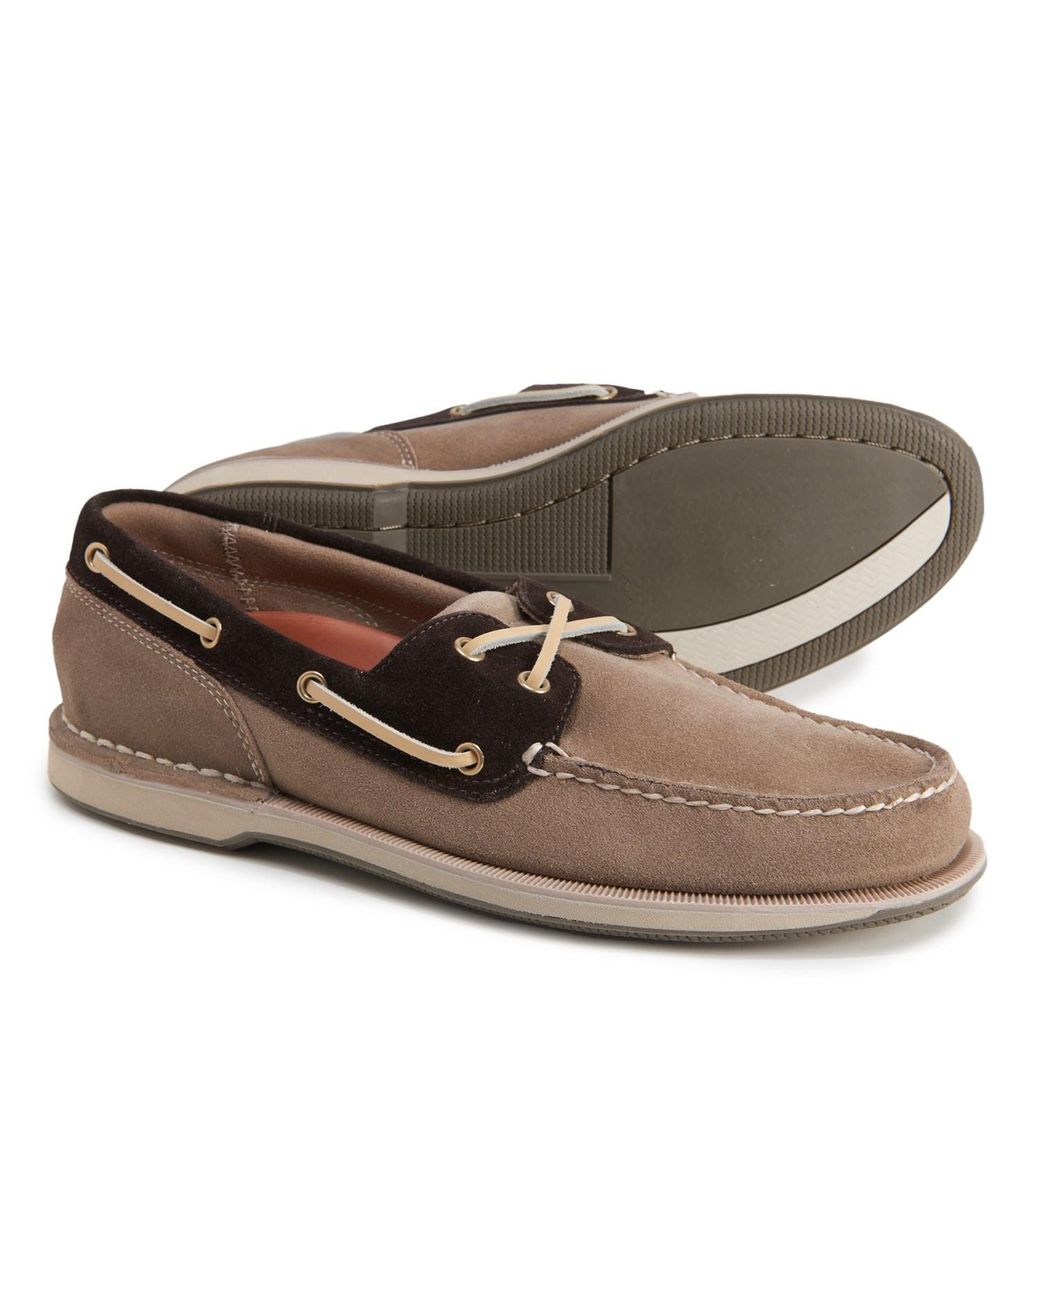 Rockport Suede Perth Boat Shoes for Men - Lyst